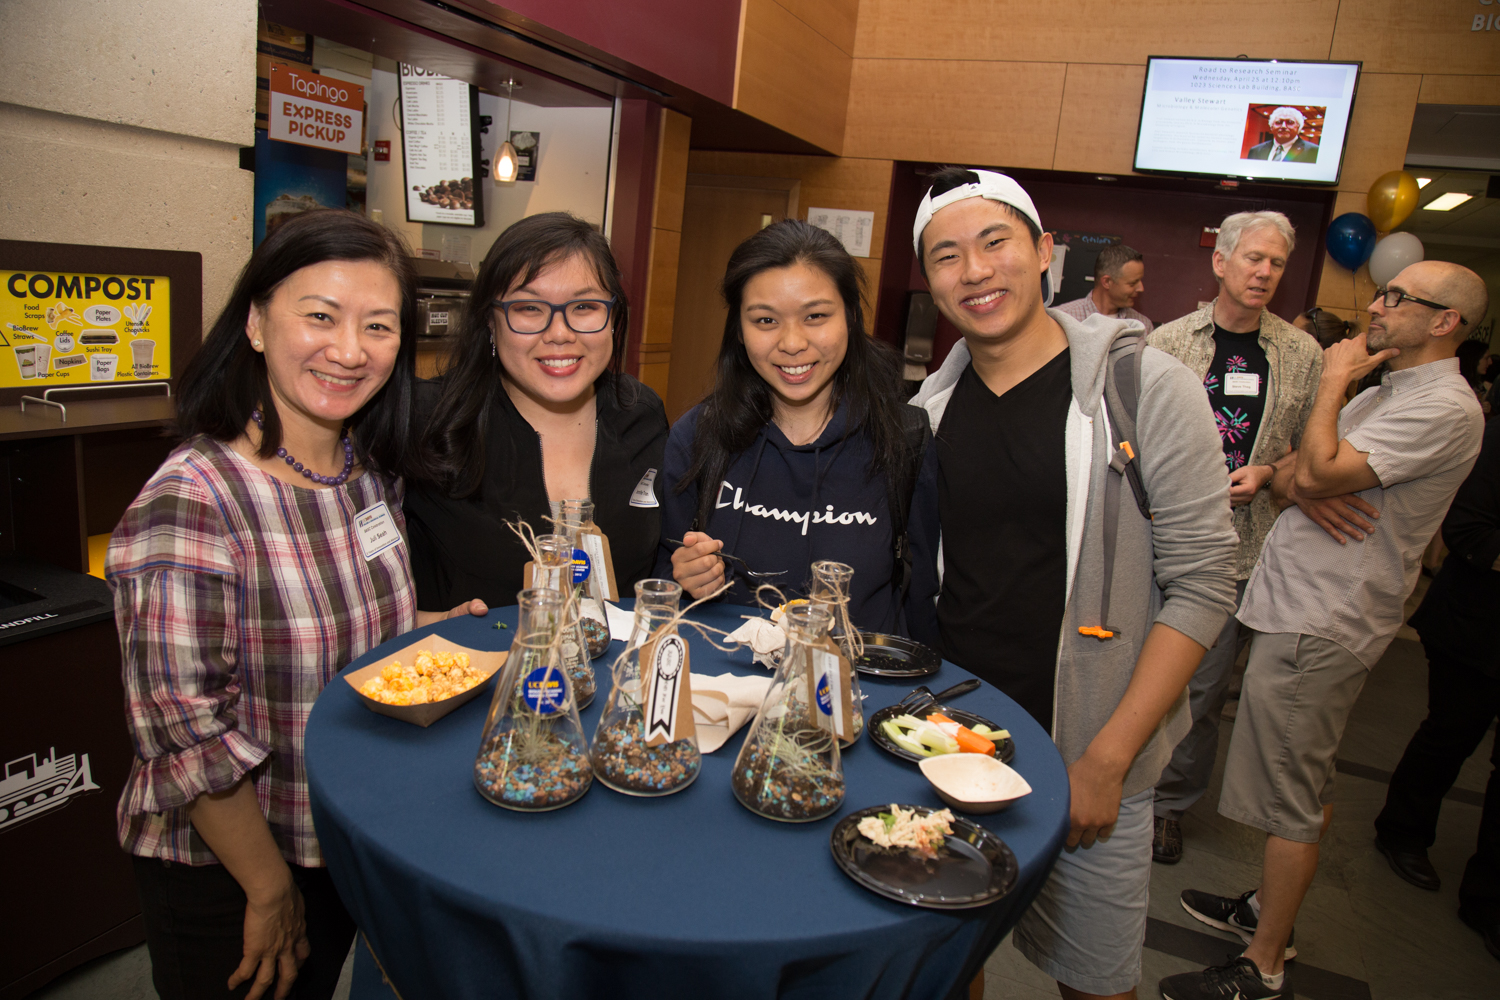 Students enjoy some food at the fifth-year anniversary party for the Biology Academic Success Center. Photo by David Slipher/UC Davis